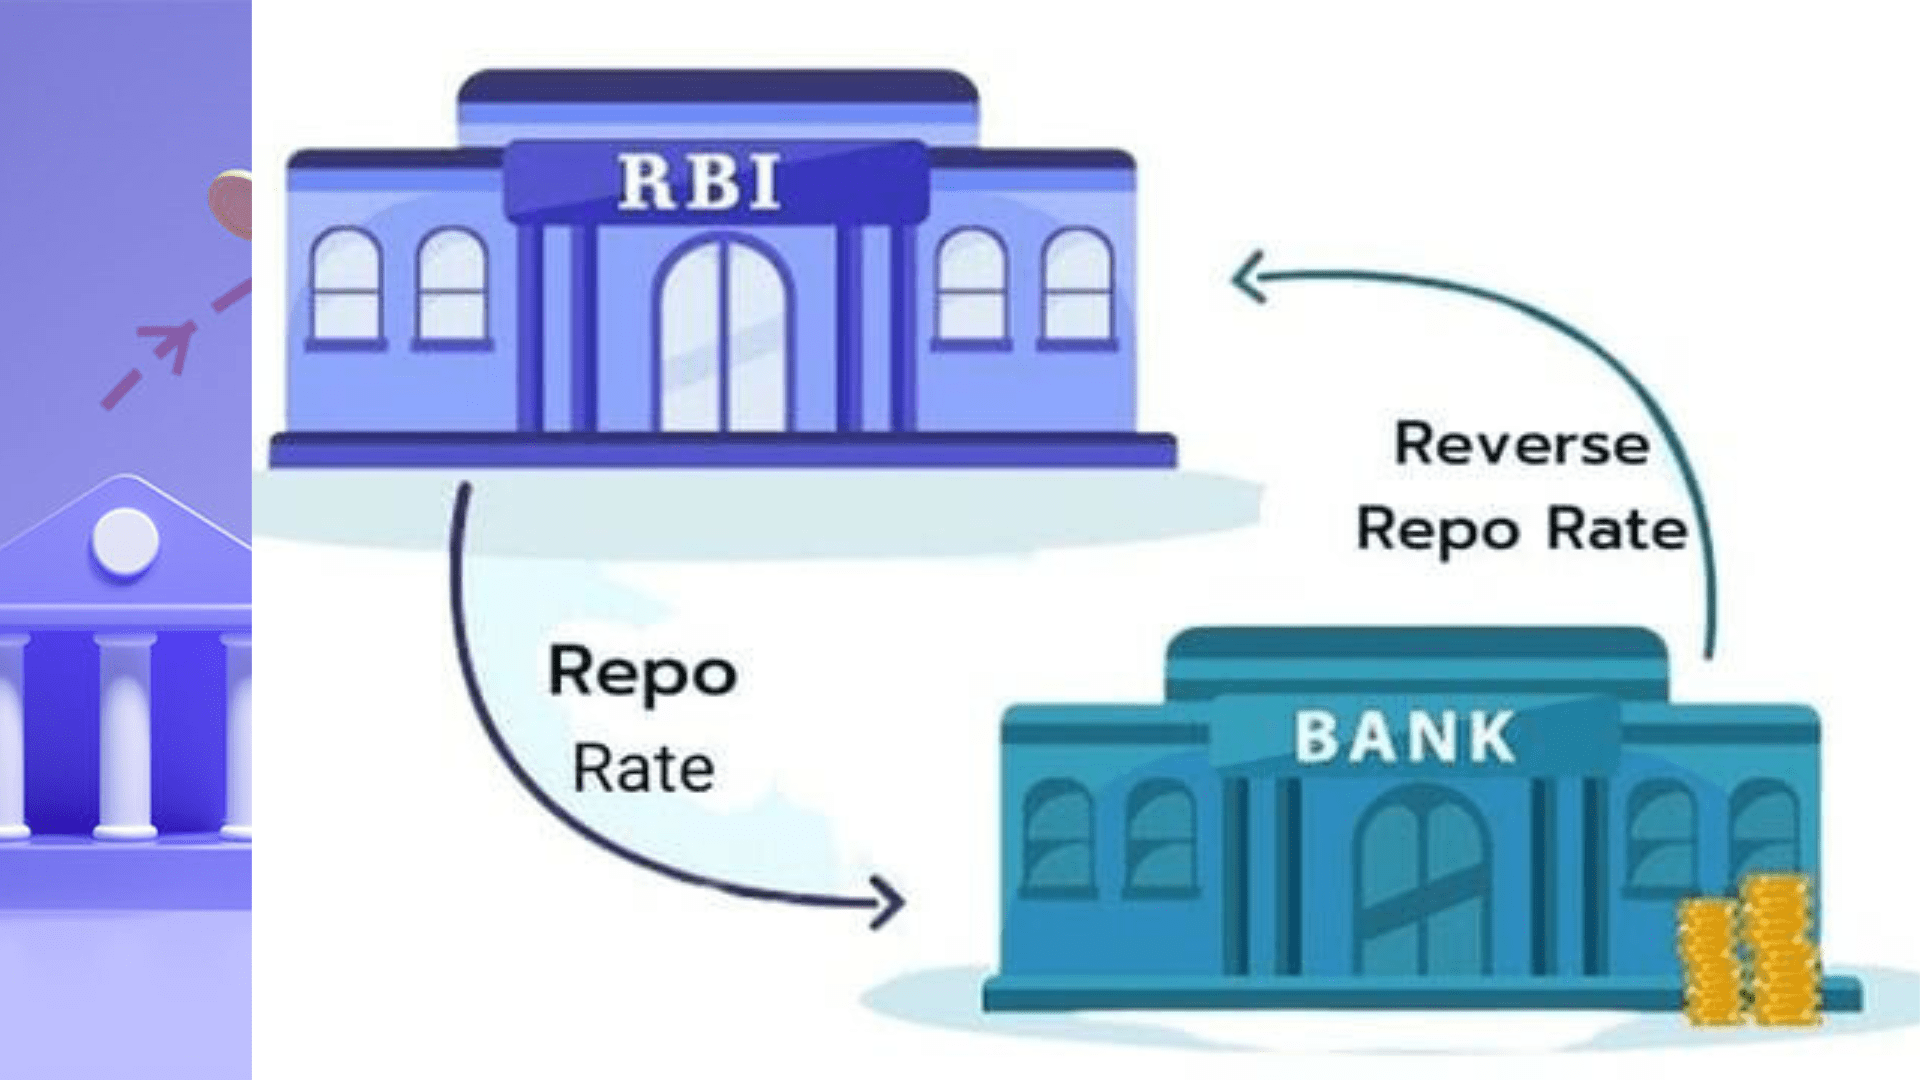 What Is Repo Rate and Reverse Repo Rate